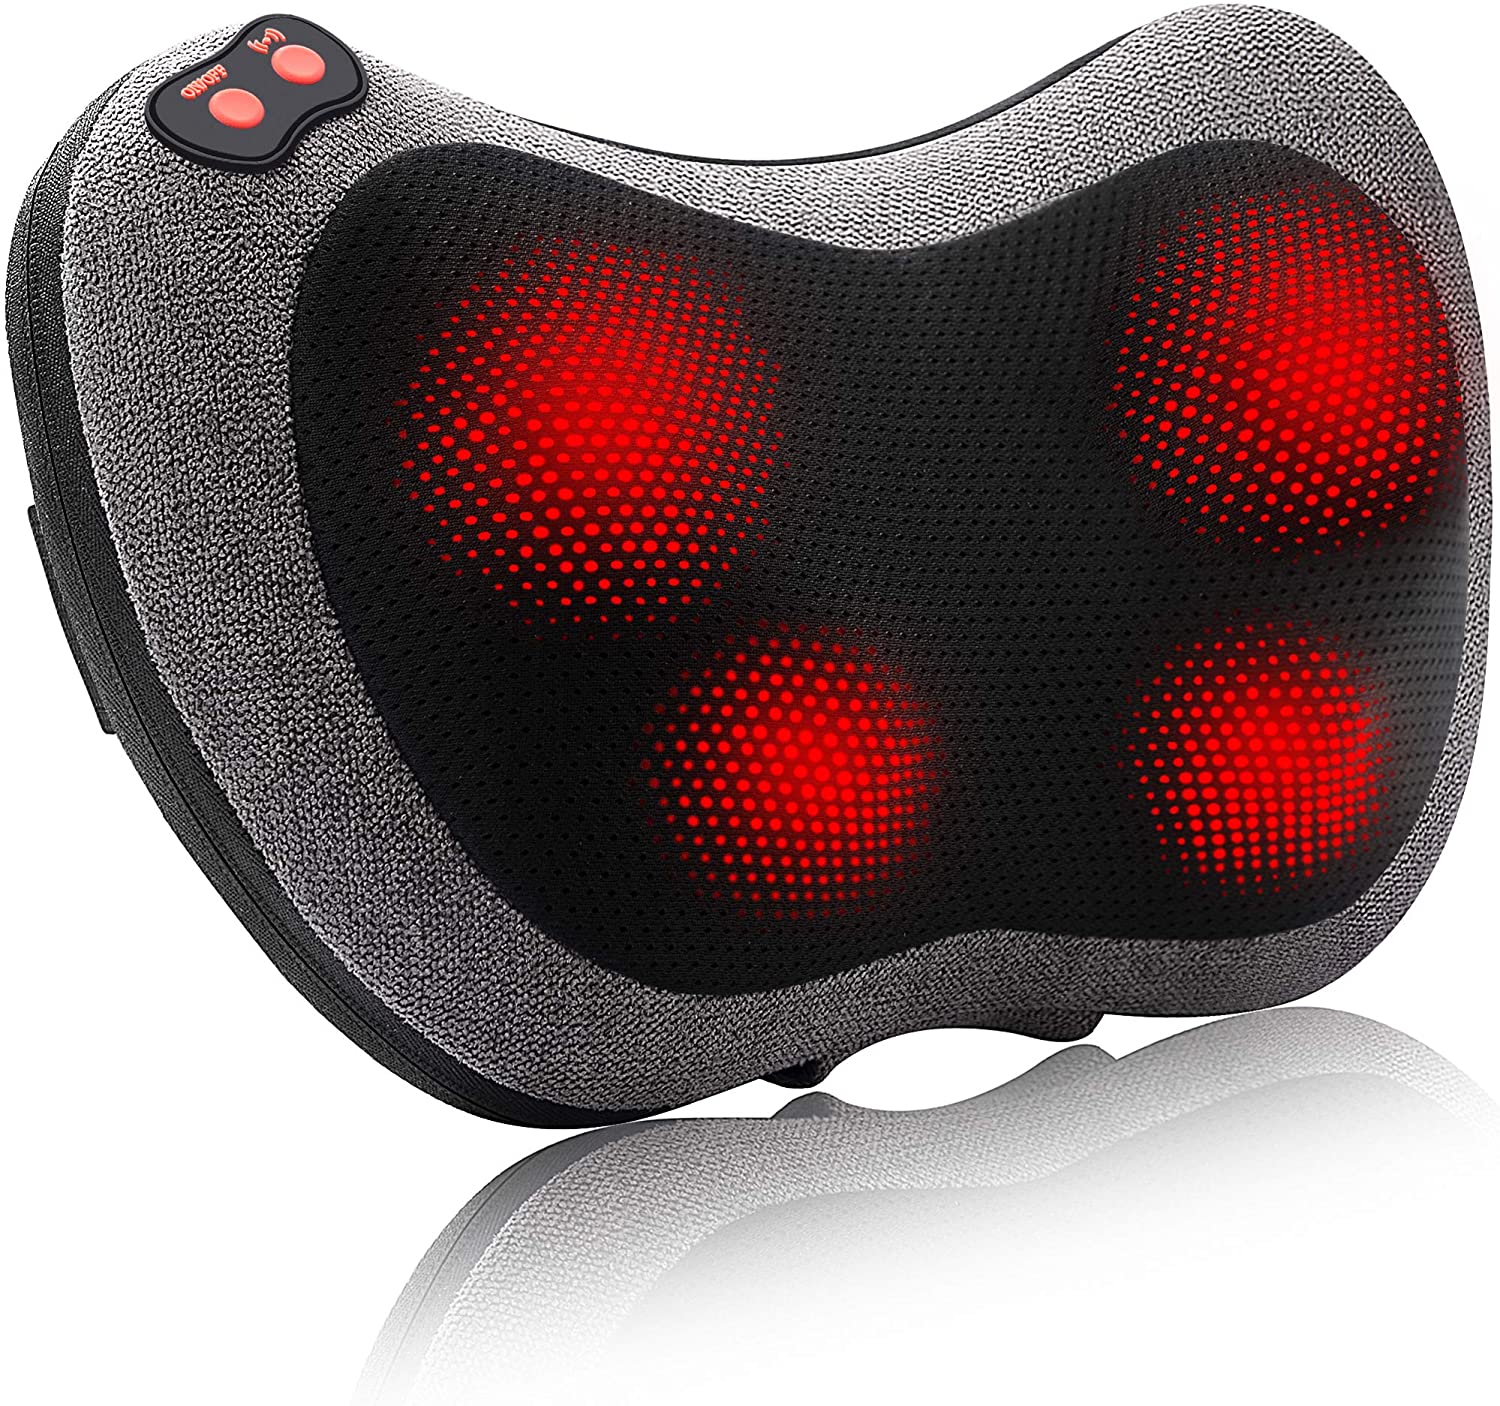 Review of Papillon Back Massager with Heat